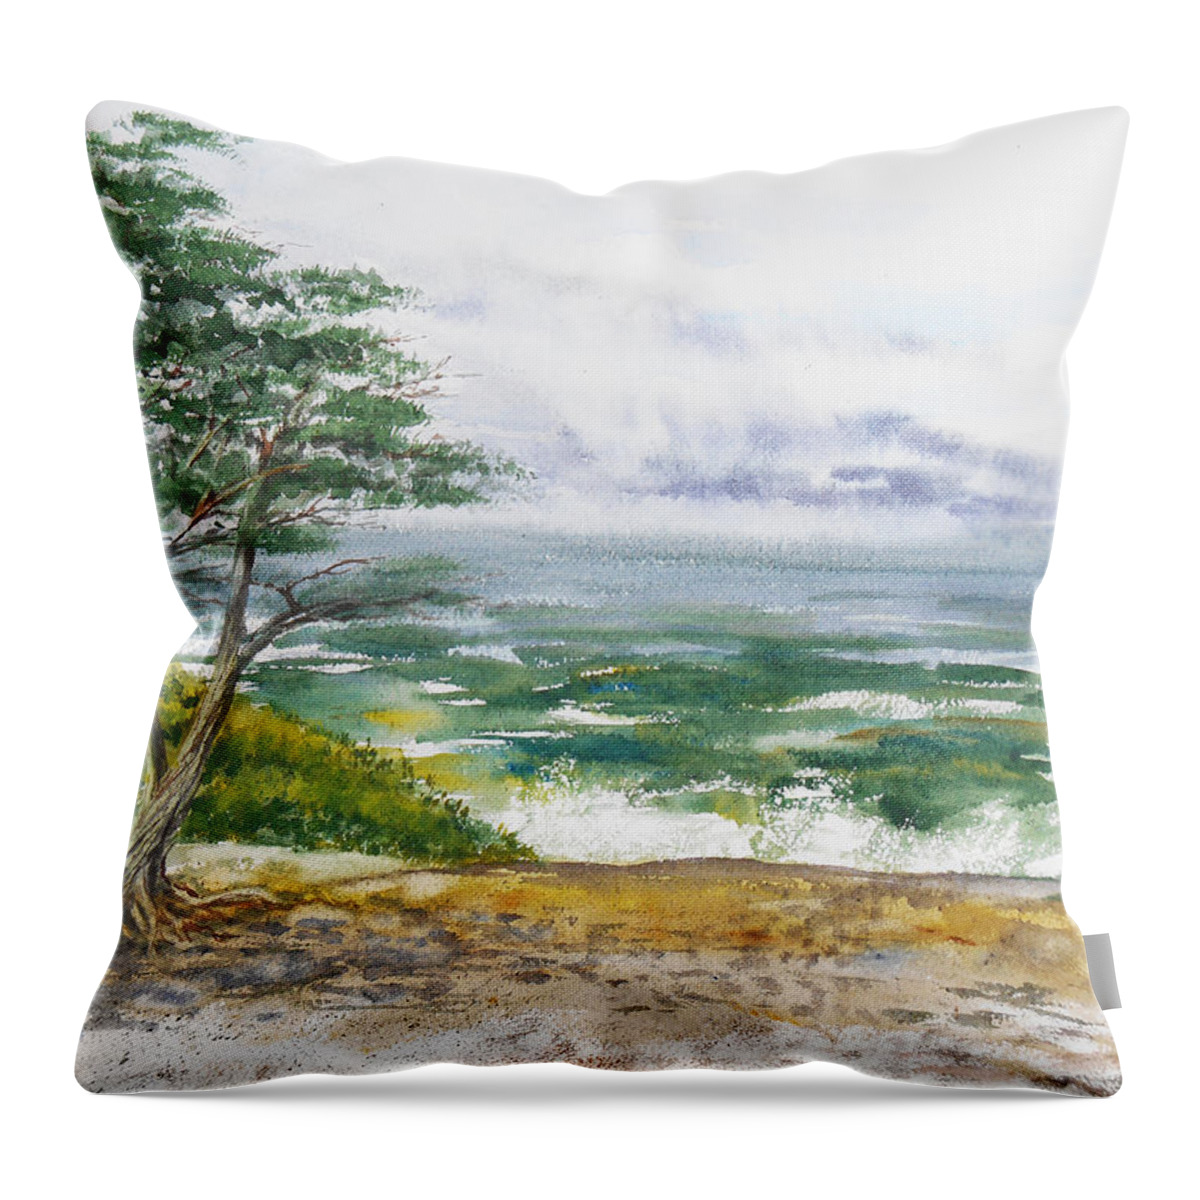 Seascape Throw Pillow featuring the painting Stormy Morning At Carmel By The Sea California by Irina Sztukowski